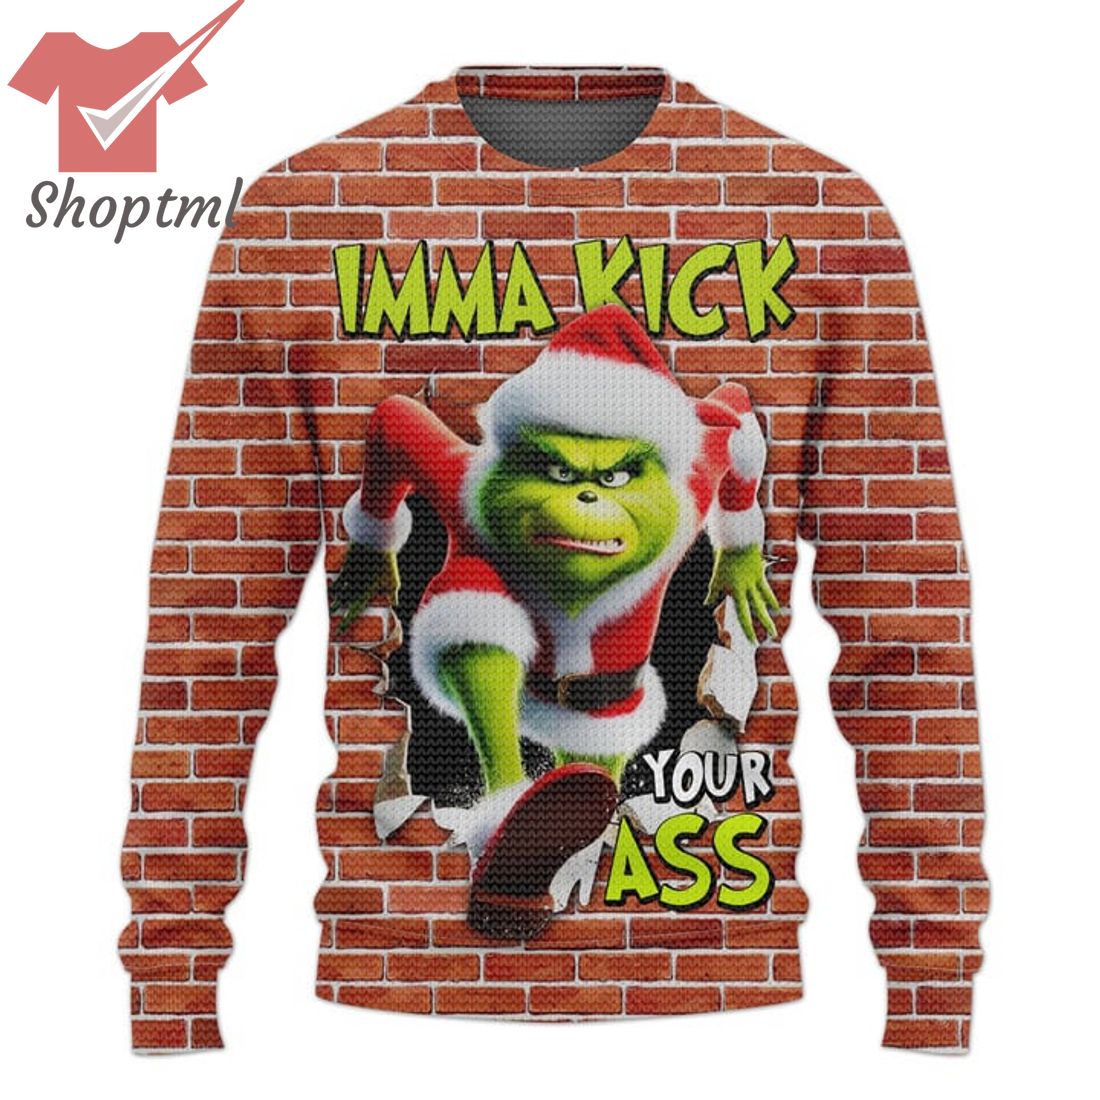 The Grinch Imma Kick You Ass Oops Ugly Christmas Sweater